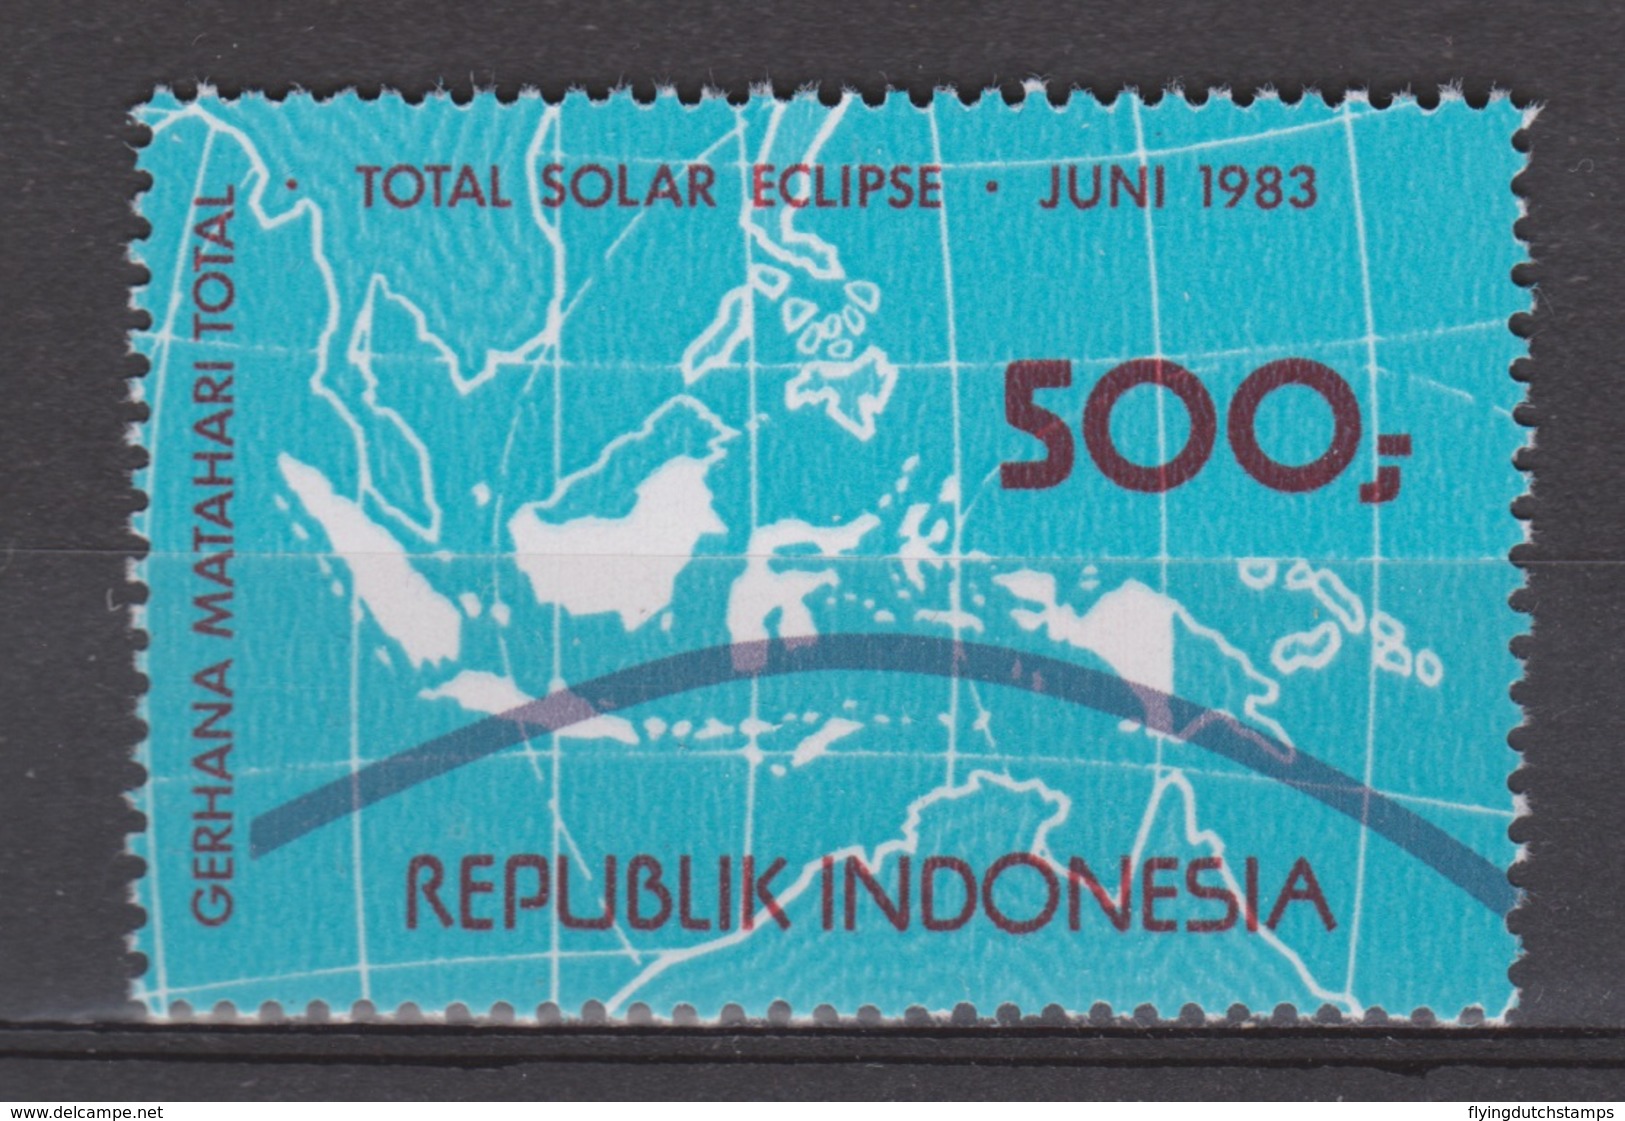 Indonesie 1156 MNH ;  Zonsverduistering, Solar Eclips 1983 MANY CHEAP STAMPS INDONESIA - Astrology